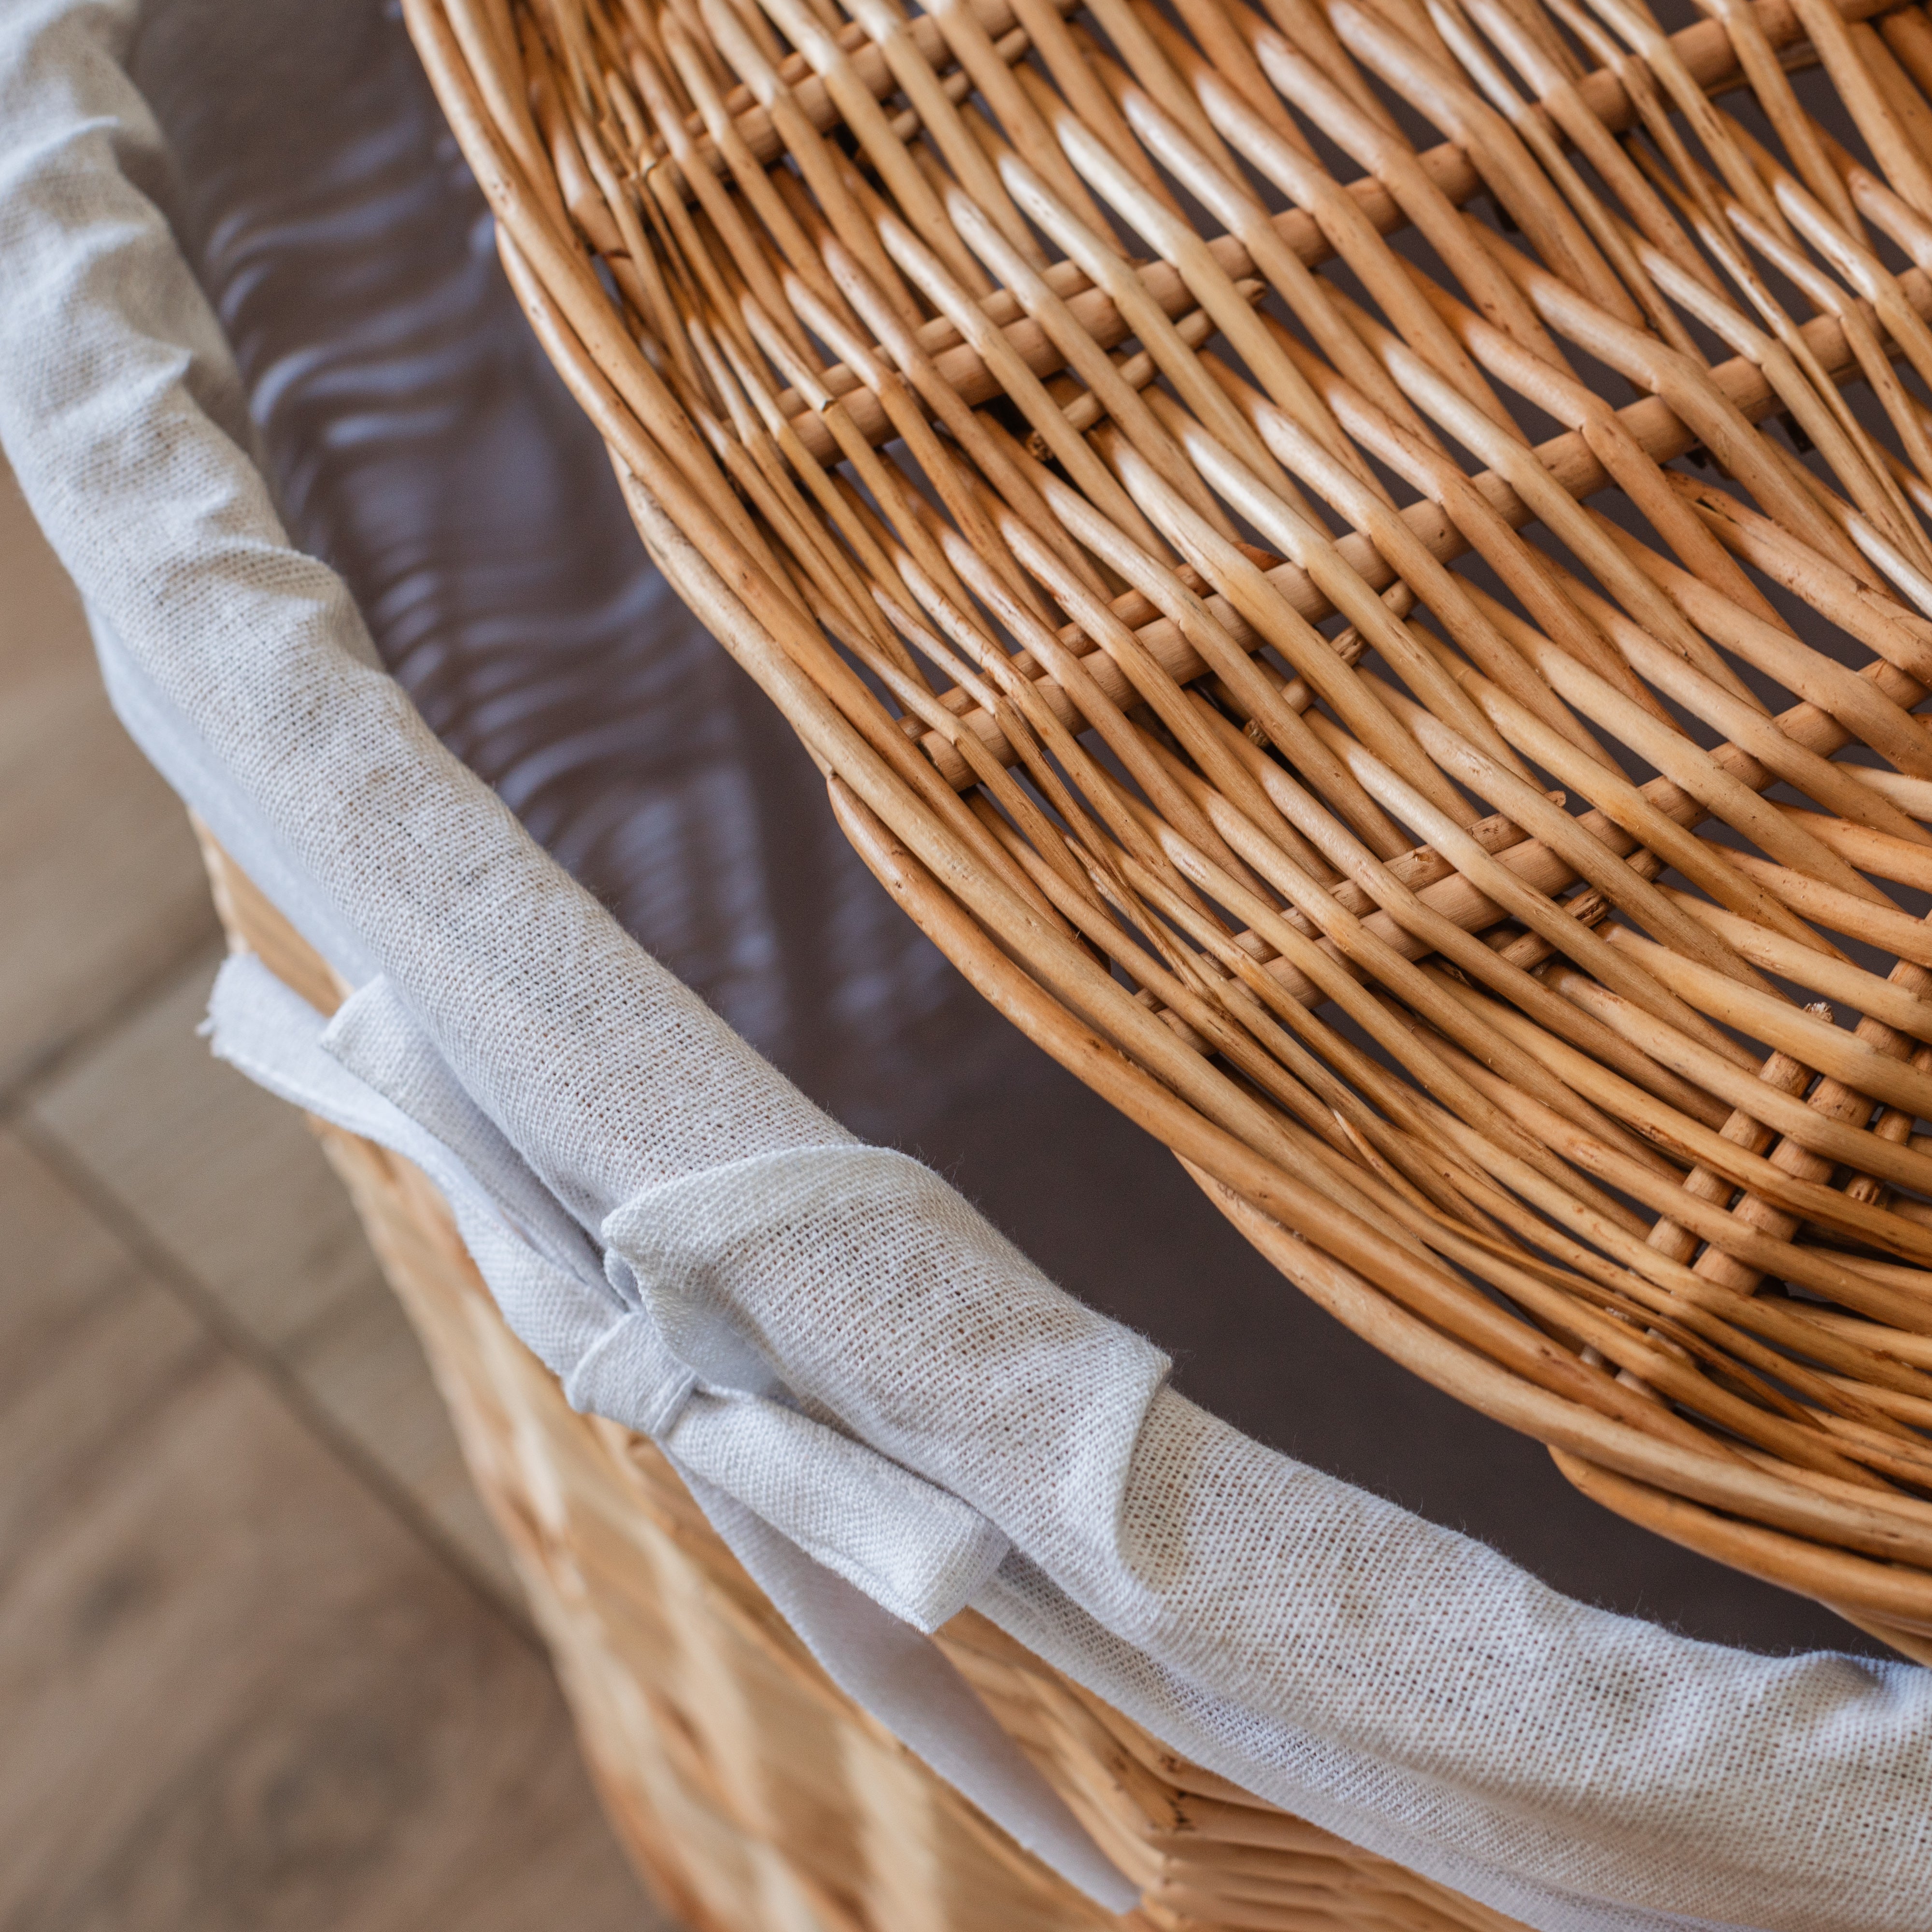 Natural Oval Wicker Laundry Basket